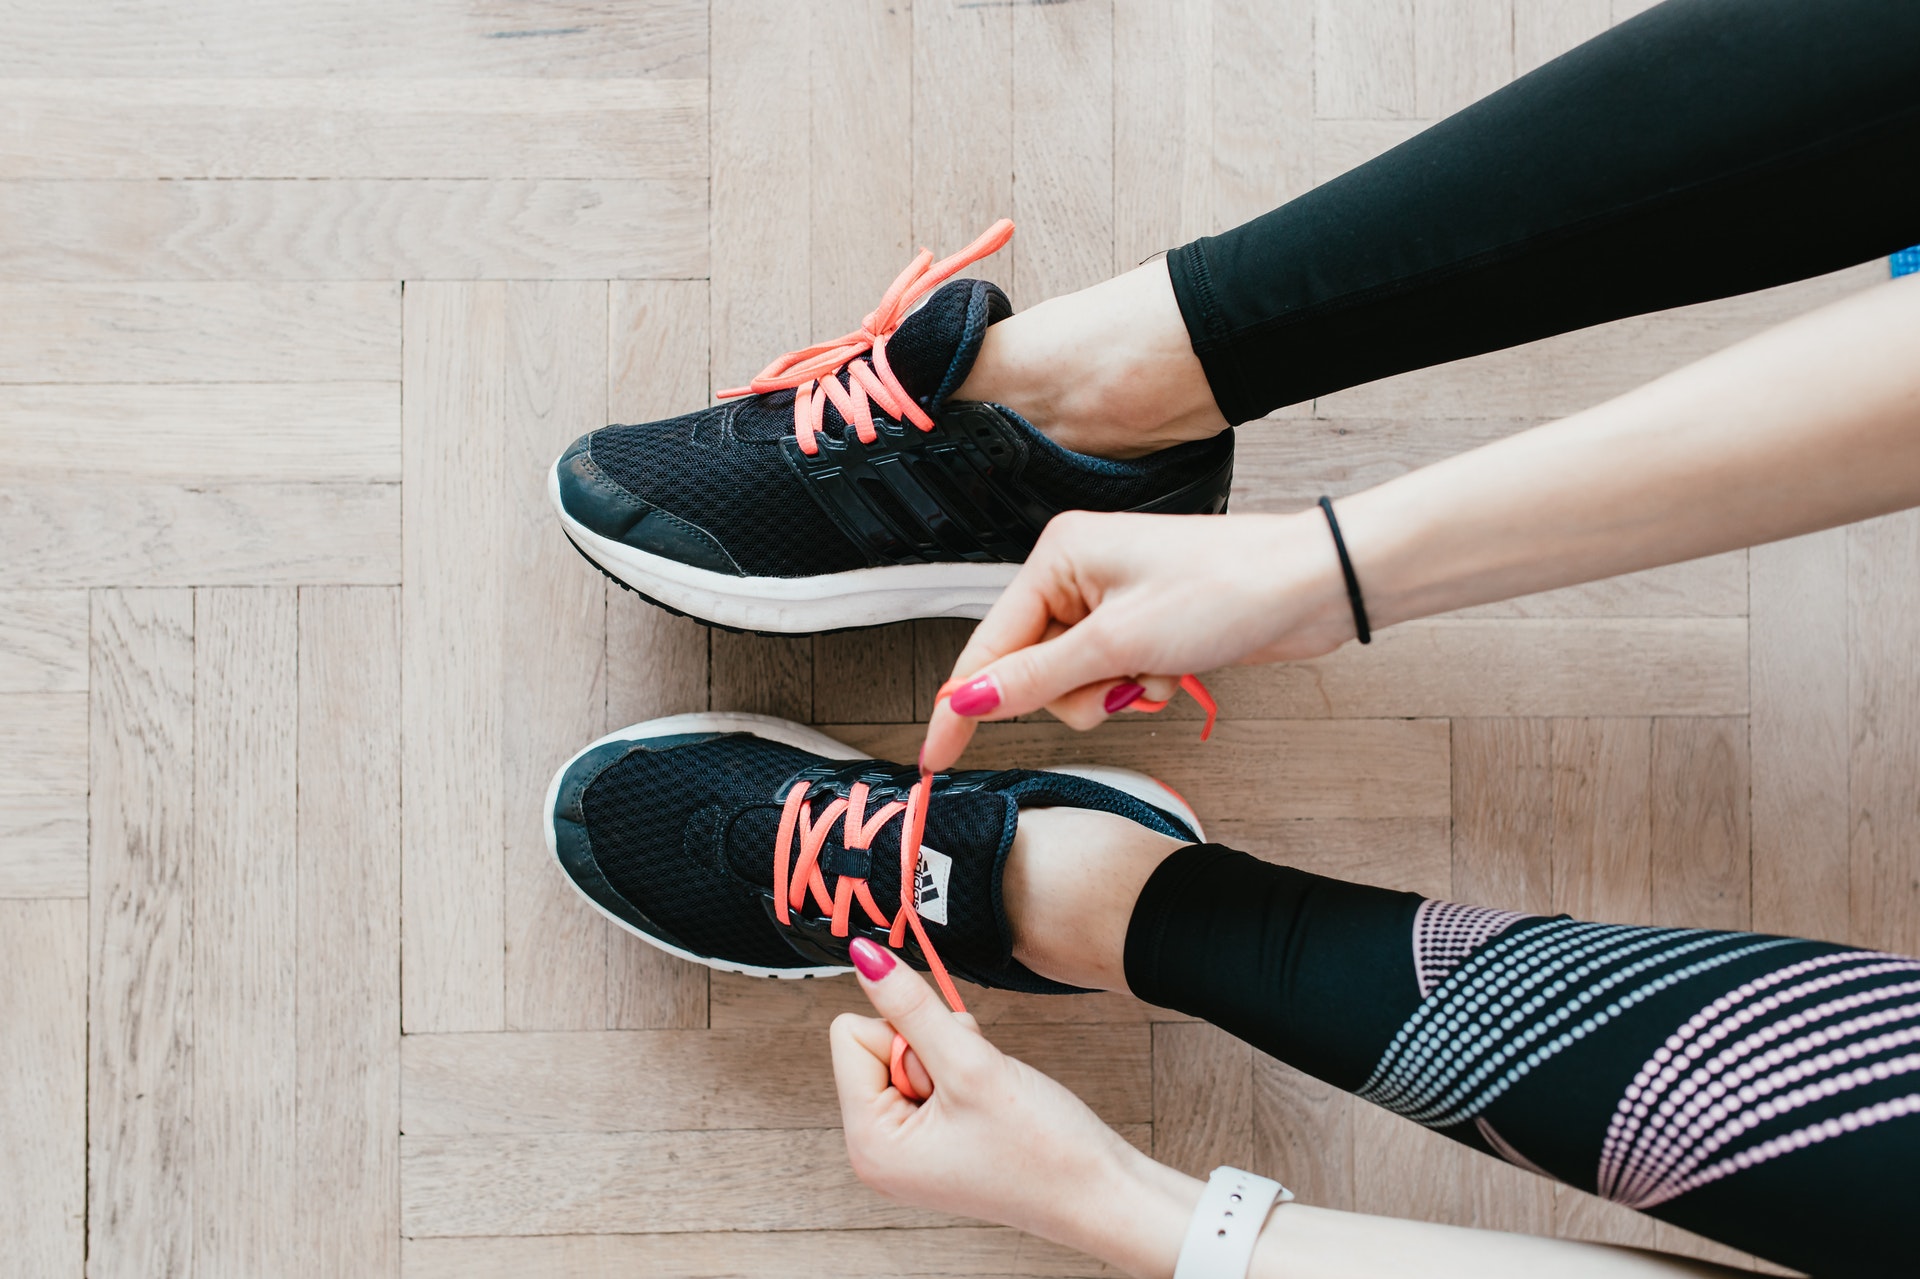 A person ties the laces of their black exercise shoes